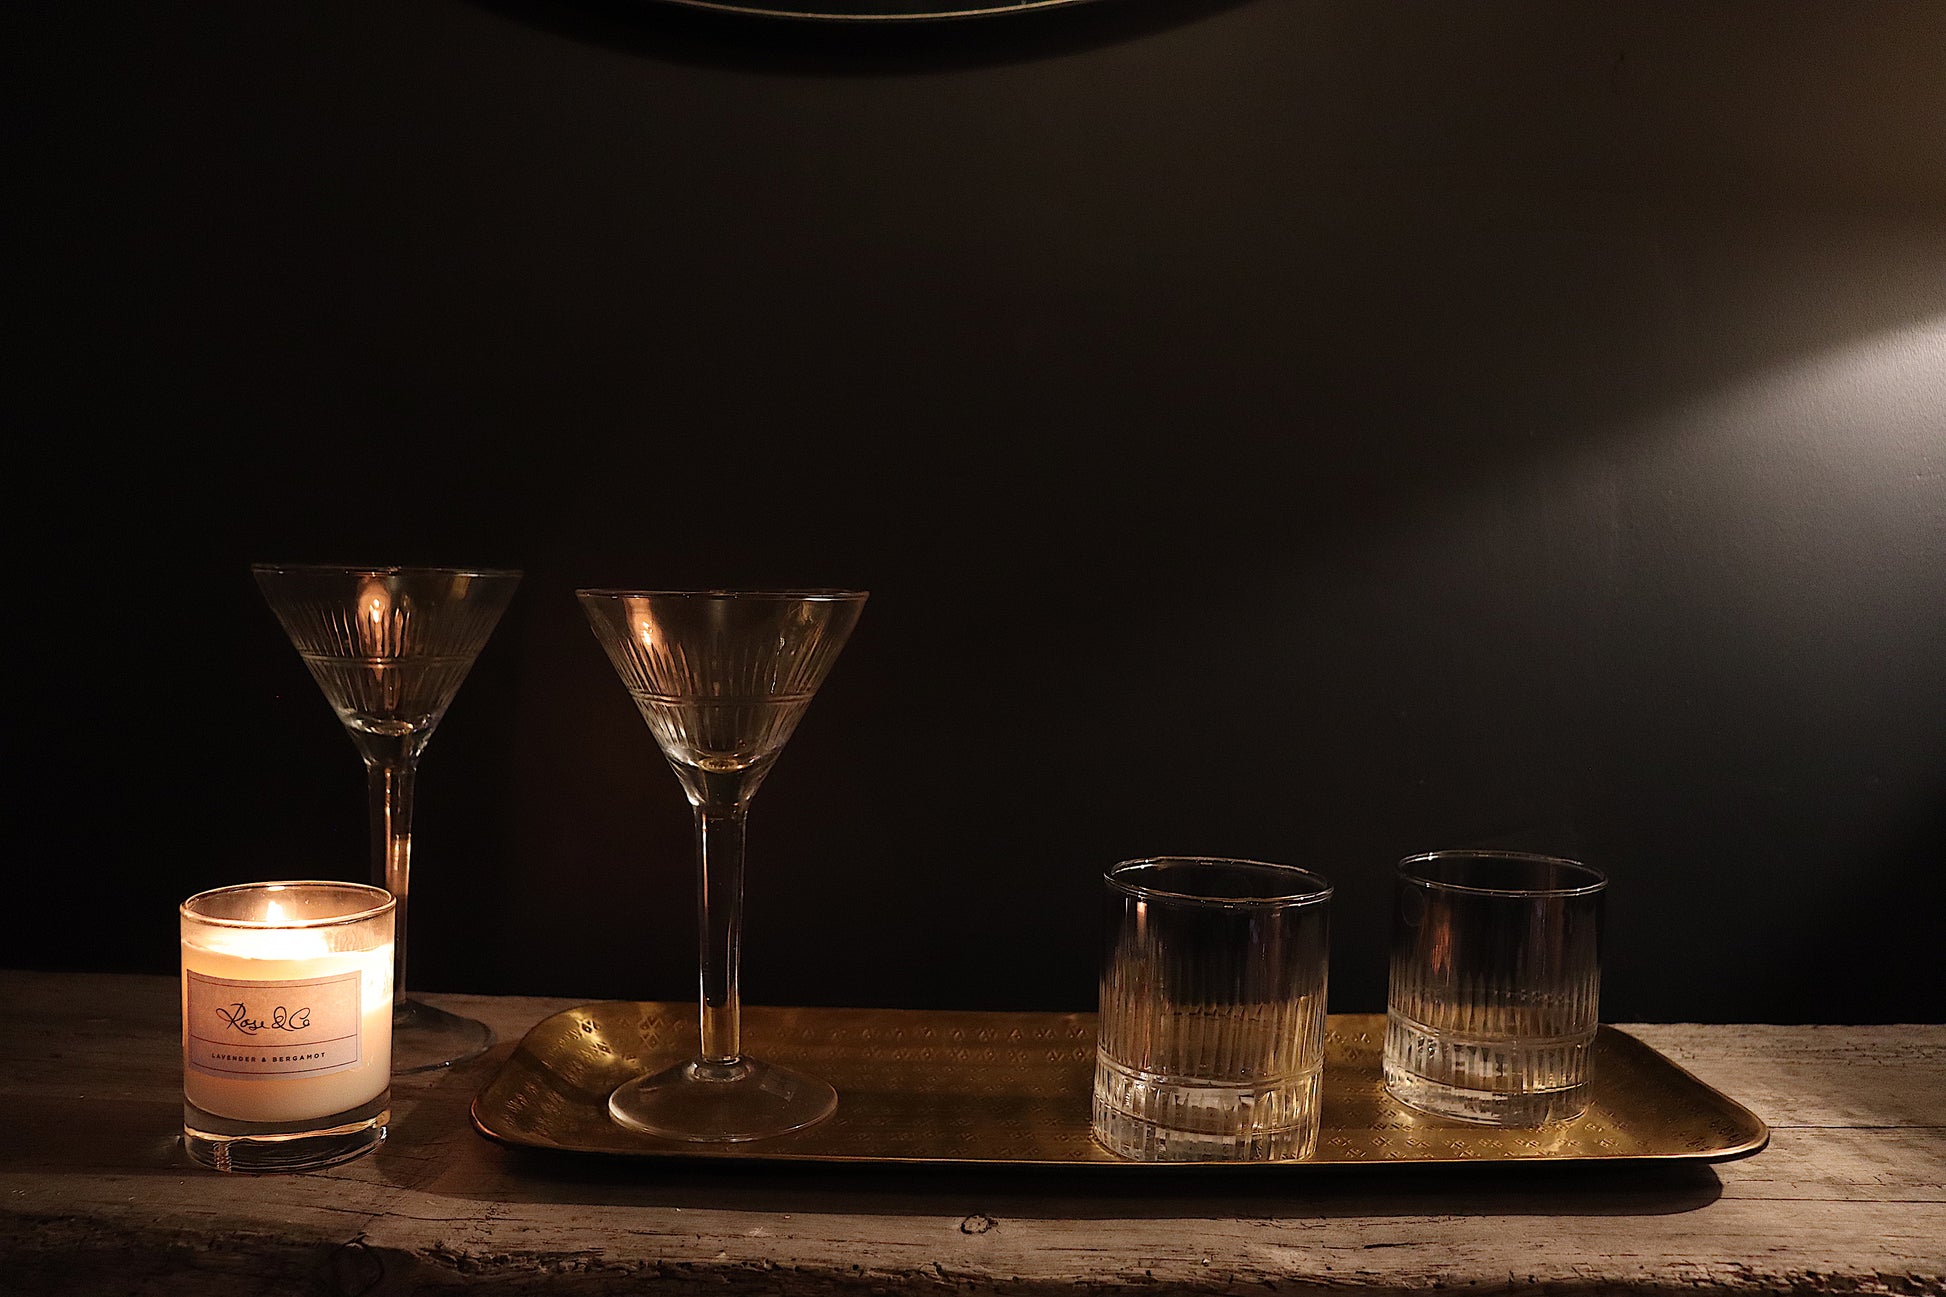 A brass tray with hand made etchings, with two cut-glass cocktail glasses, two cut-glass tumblers with a smokey hue, and a soy candle made with essential oils in a clear glass jar.